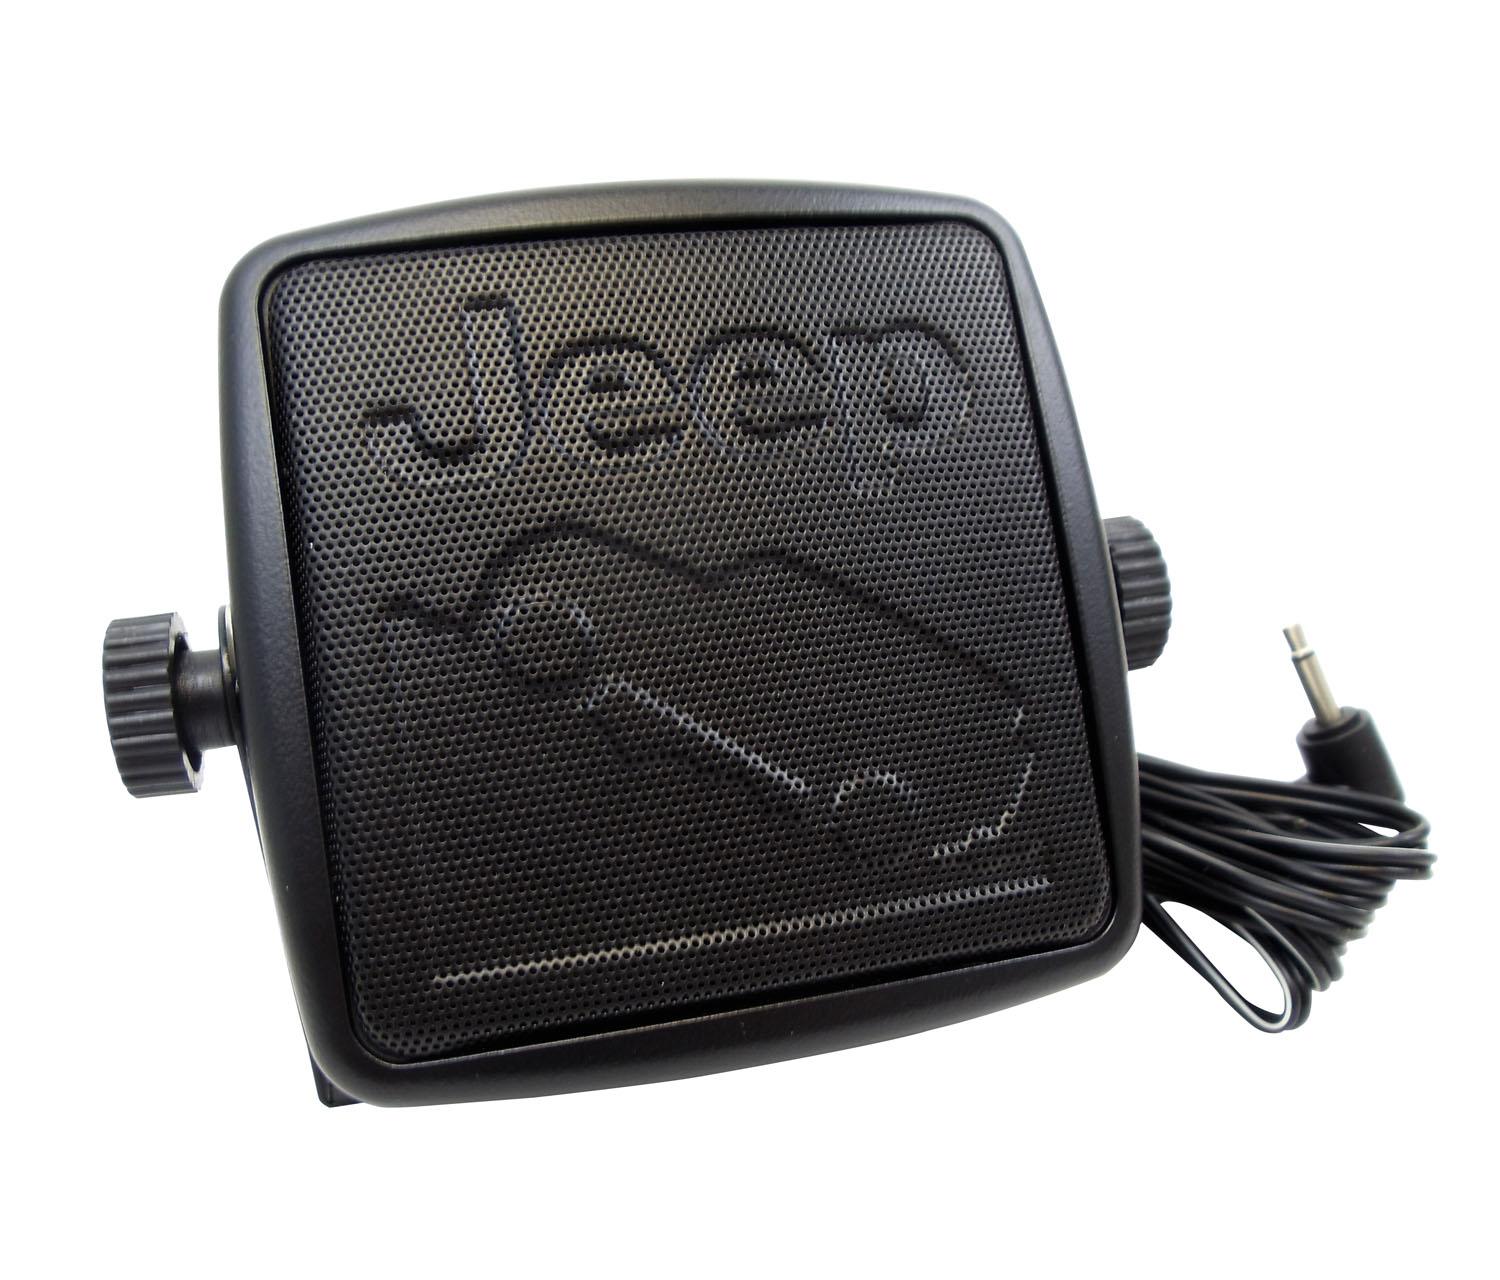 Mopar Jeep Official Licensed 2-3/4" - 8Ohm 6 Watt Wedge Design Extension Speaker With Mounting Bracket, 6 Foot Cord & 3.5Mm Plug